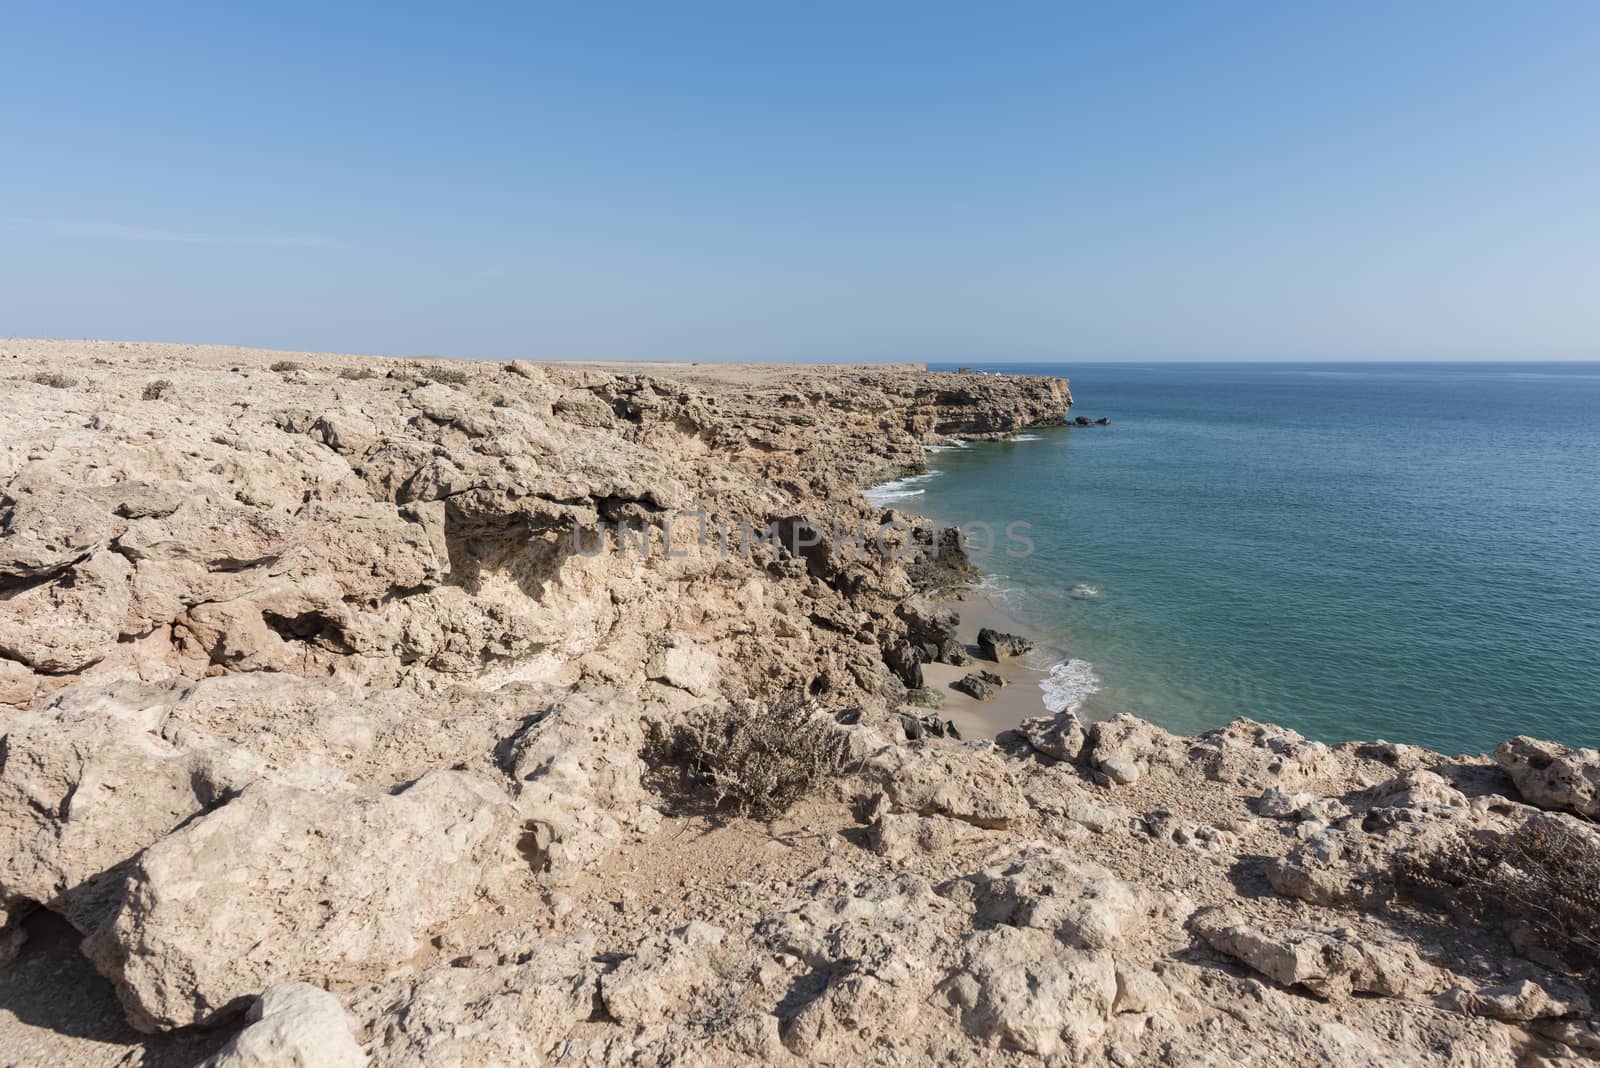 Top view from cliff of a wild beach at the coat of Ras Al Jinz, Sultanate of Oman.